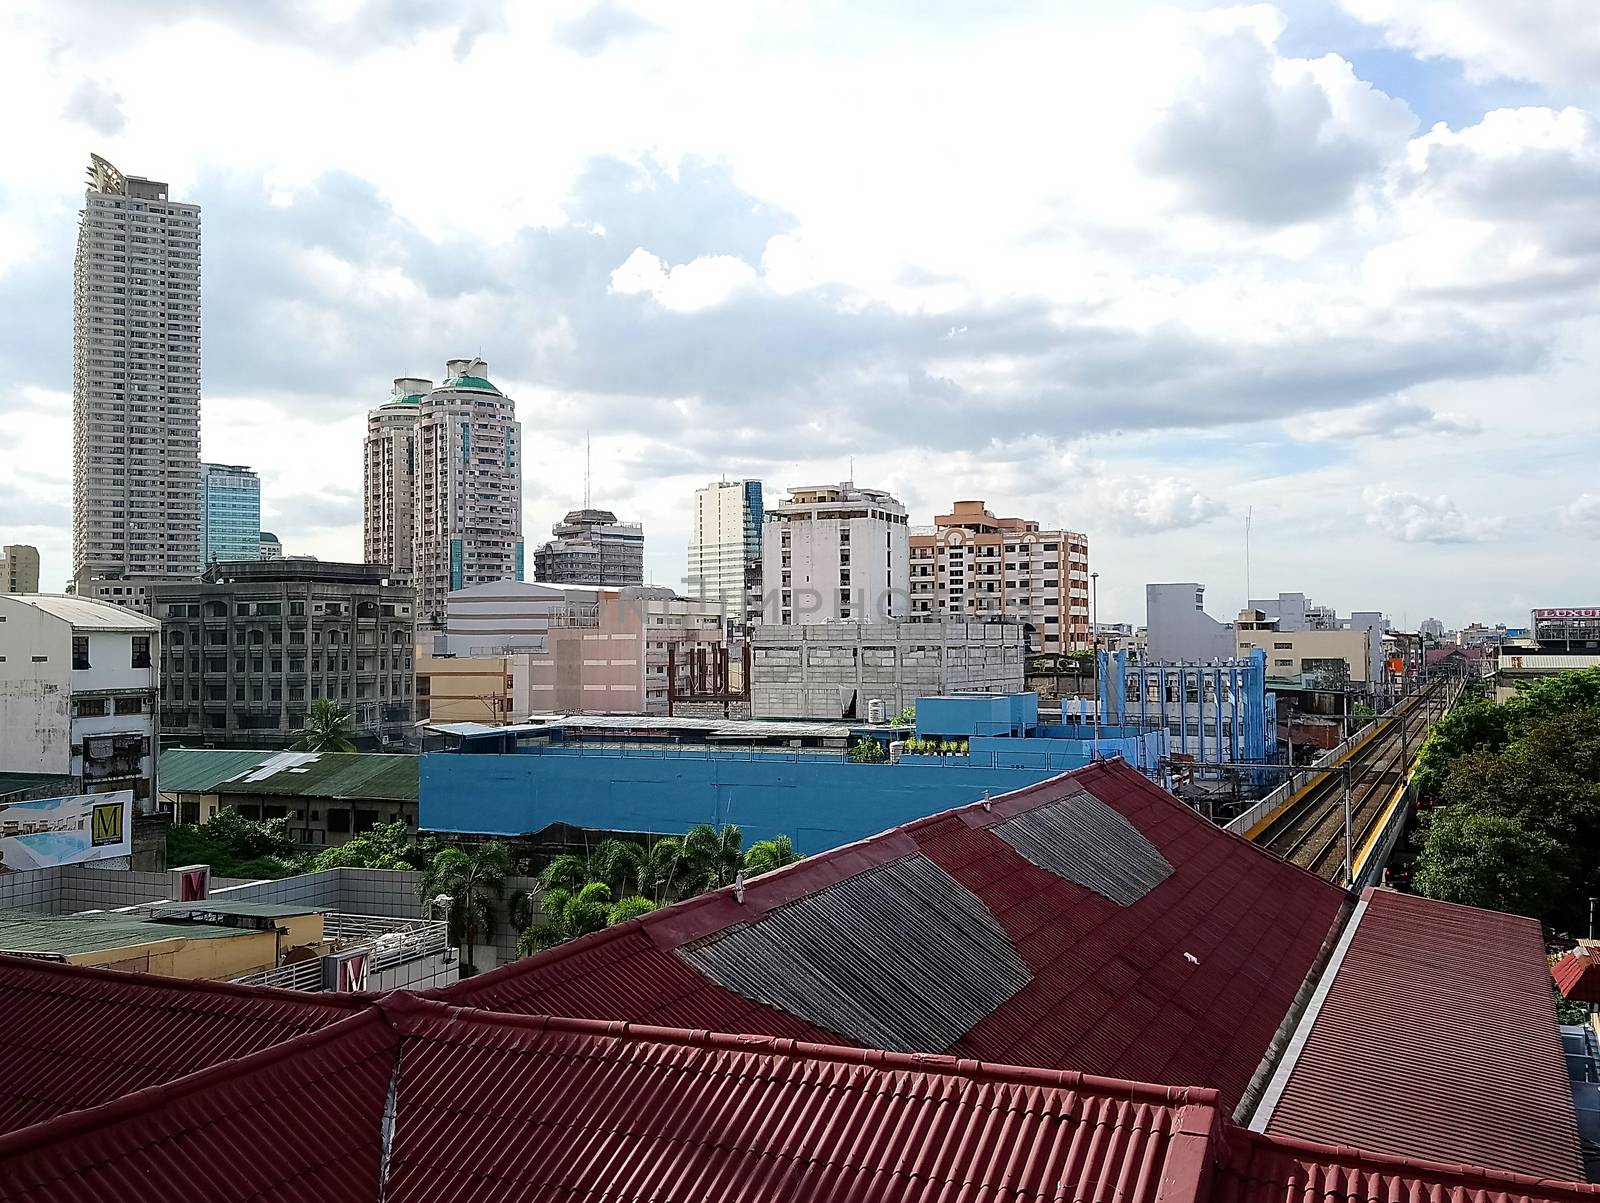 MANILA, PH - JUNE 26 - Overview of Manila city and buildings during daytime on June 26, 2020 in Manila, Philippines.